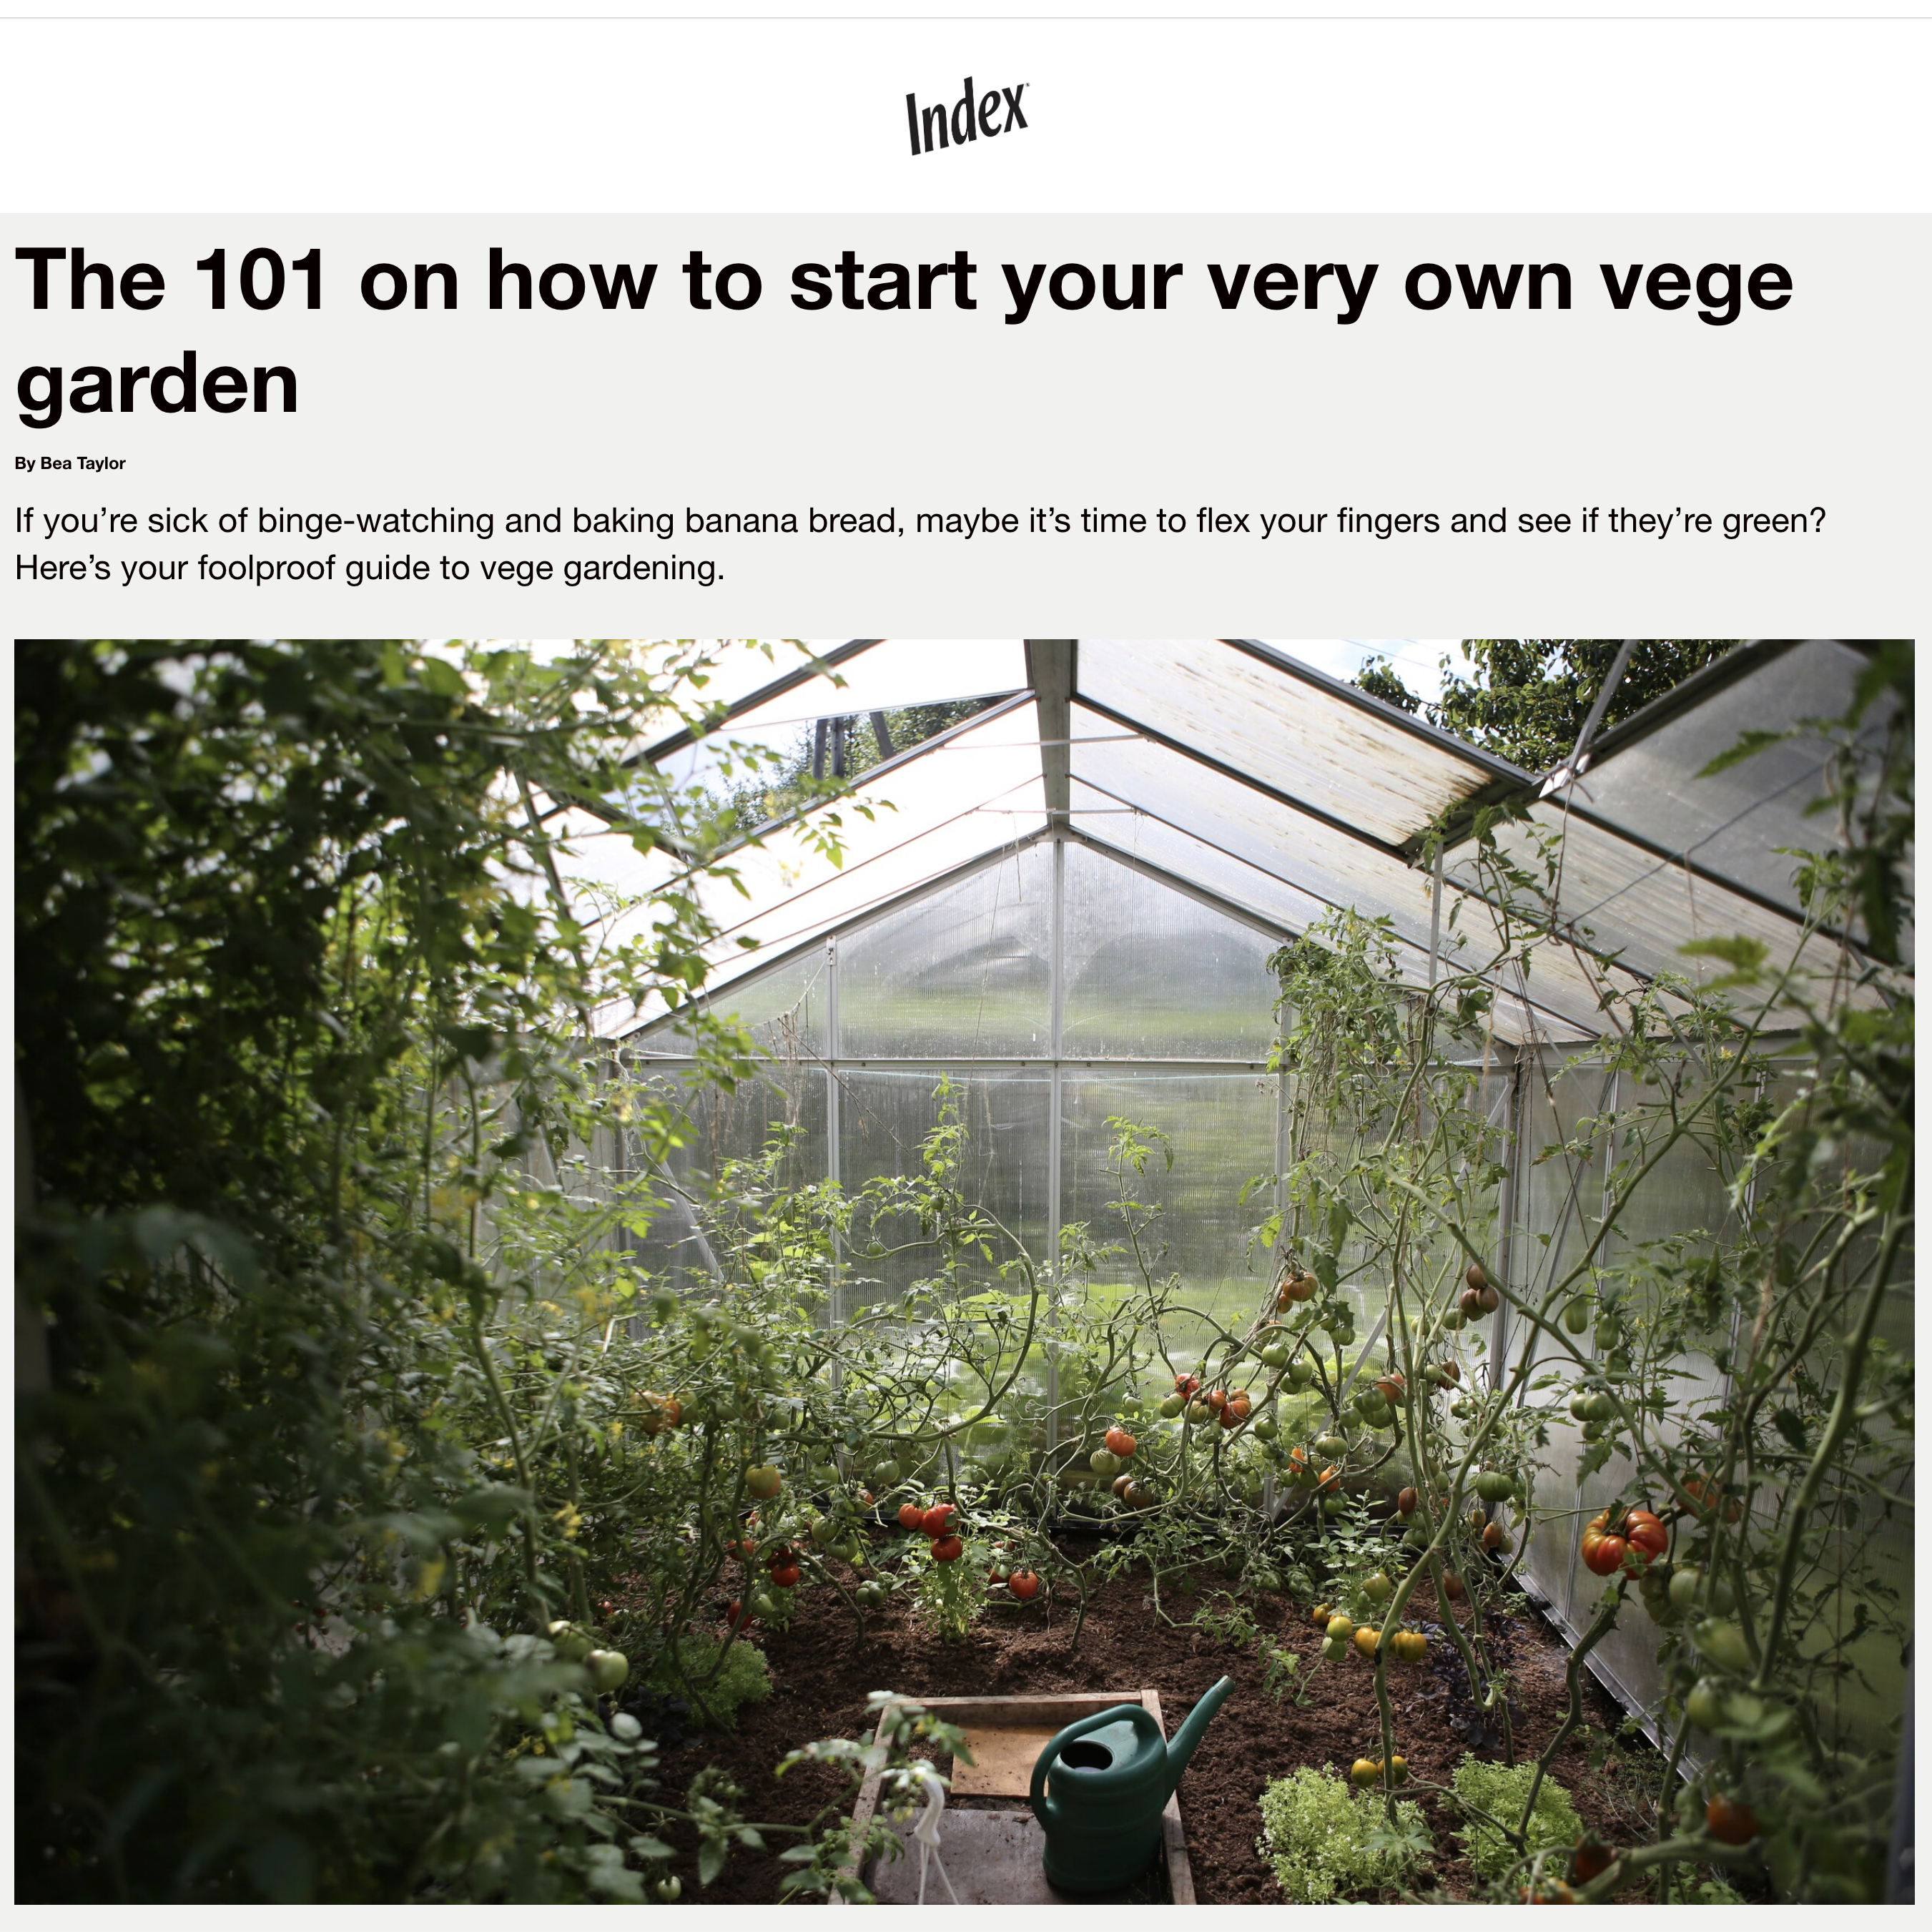 Index Magazine - The 101 on how to start your own Vege garden